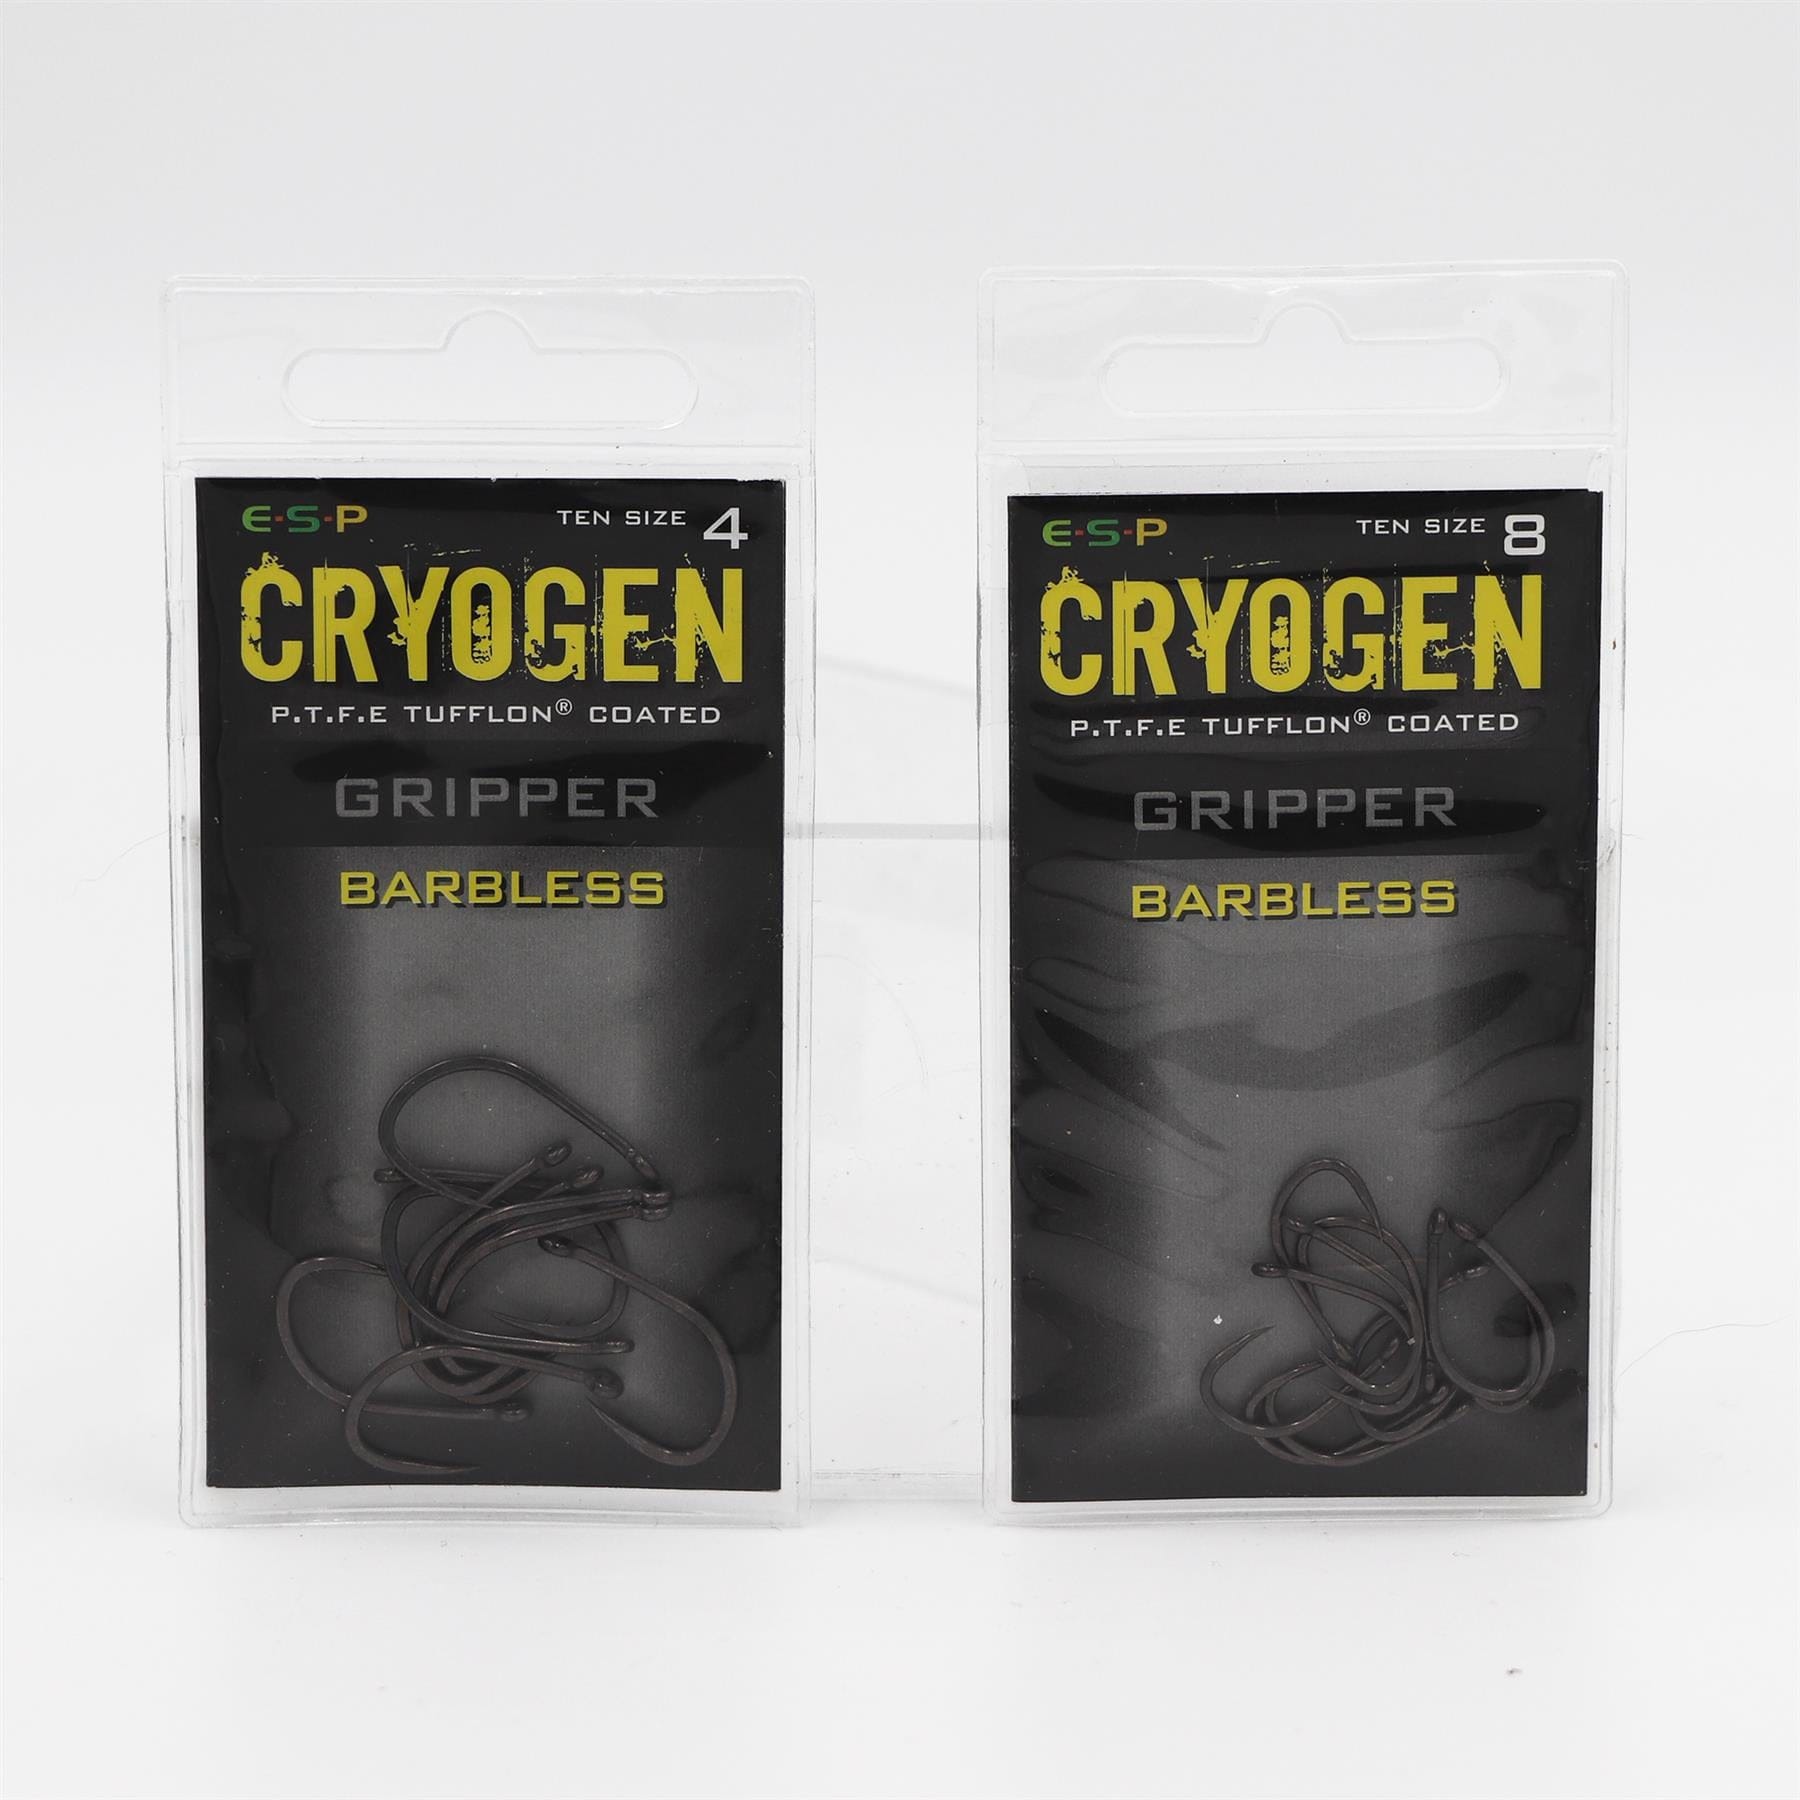 ESP Cryogen Classic Barbless Hooks - All Sizes - Rods and Lines